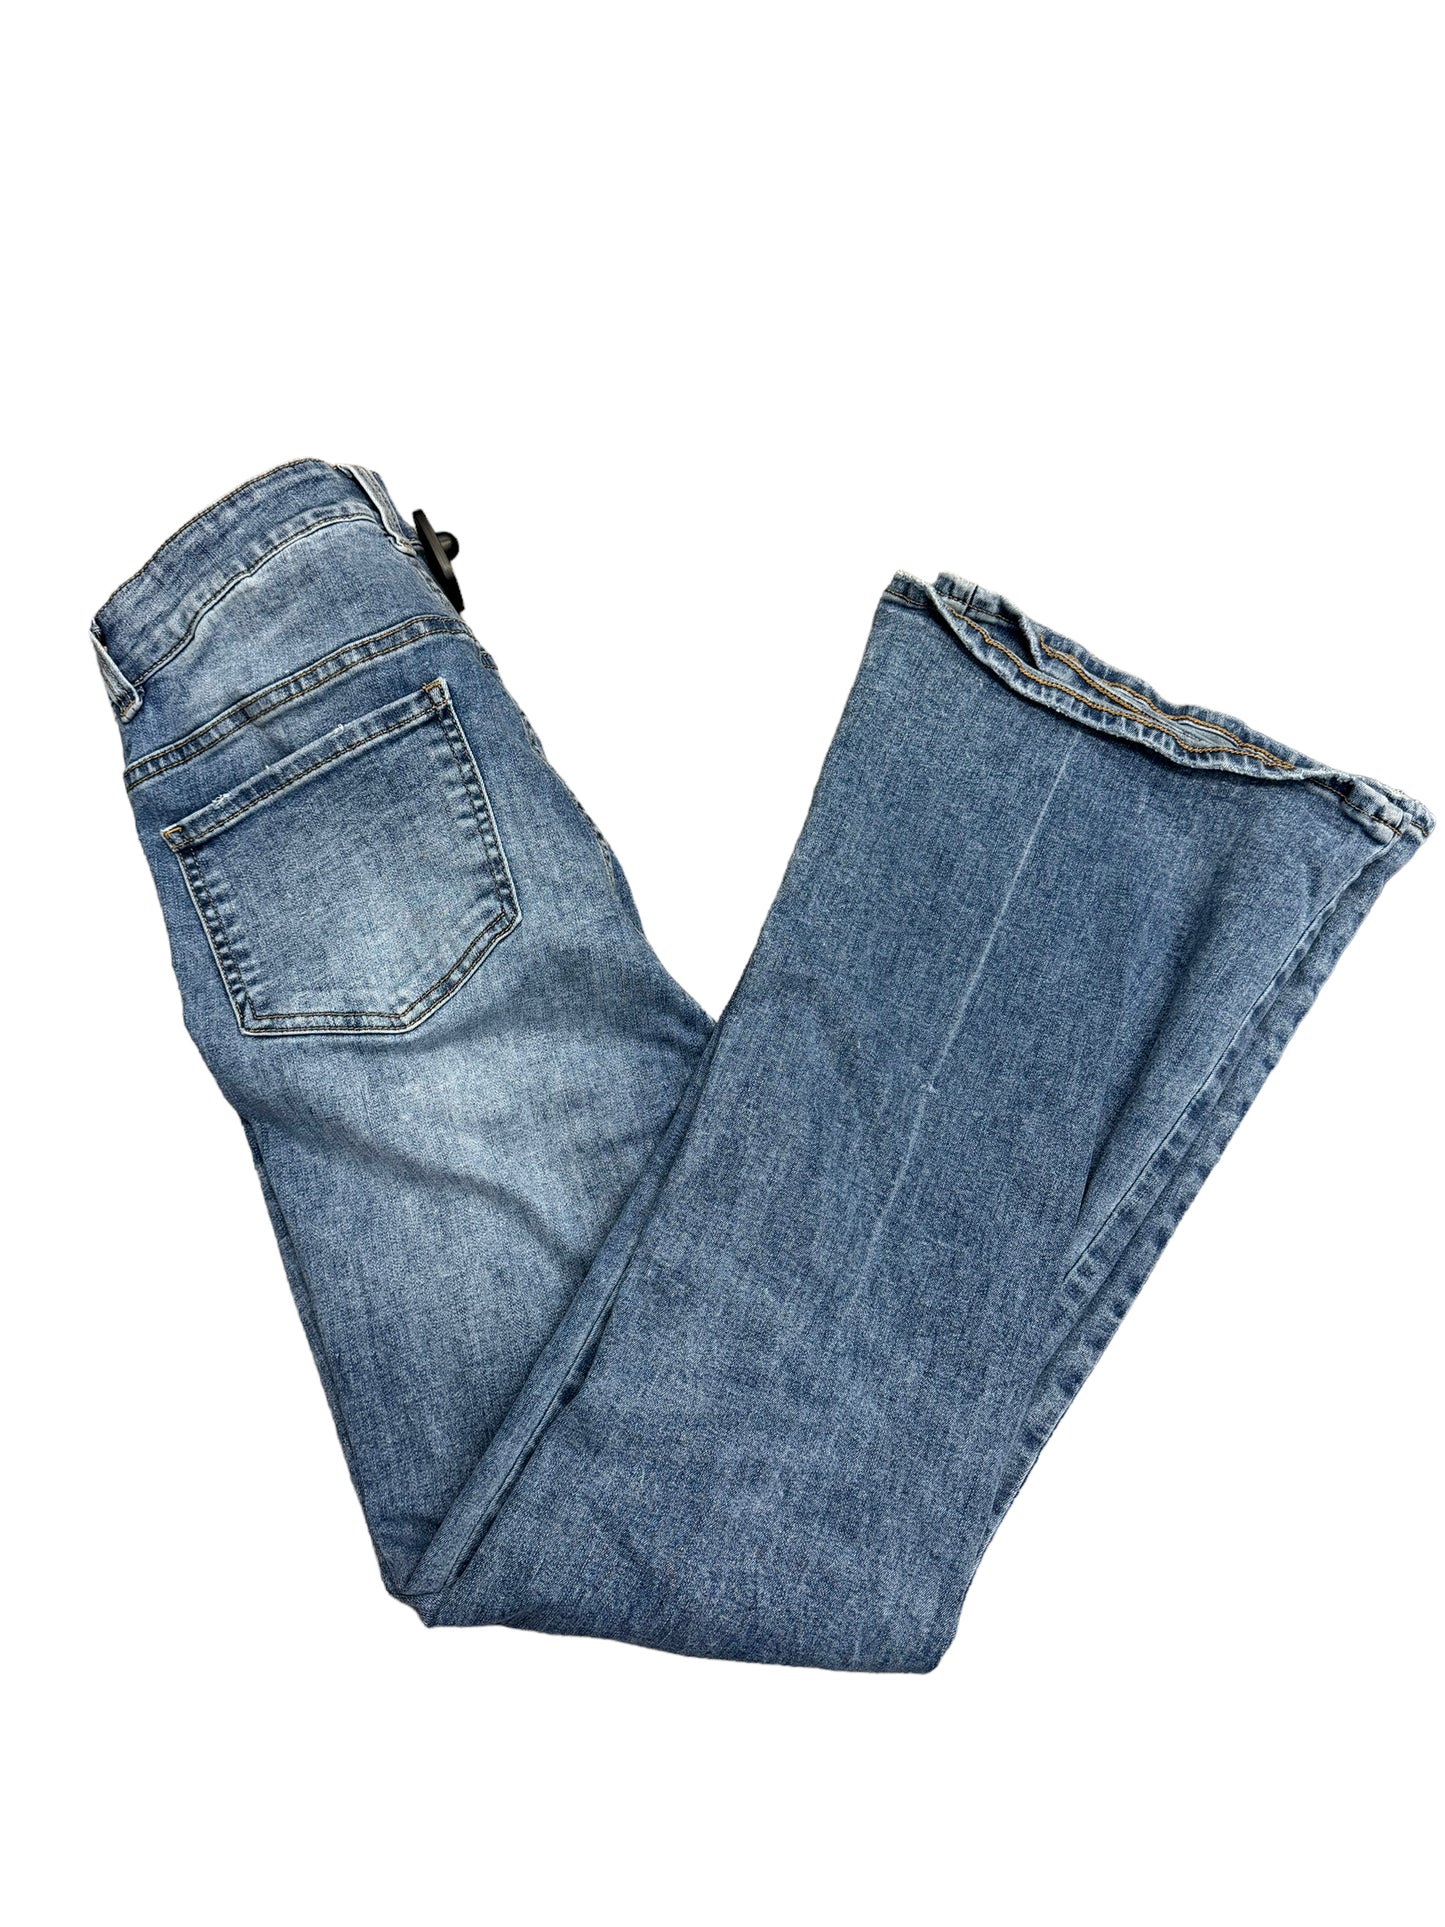 Jeans Flared By Cmb  Size: 12